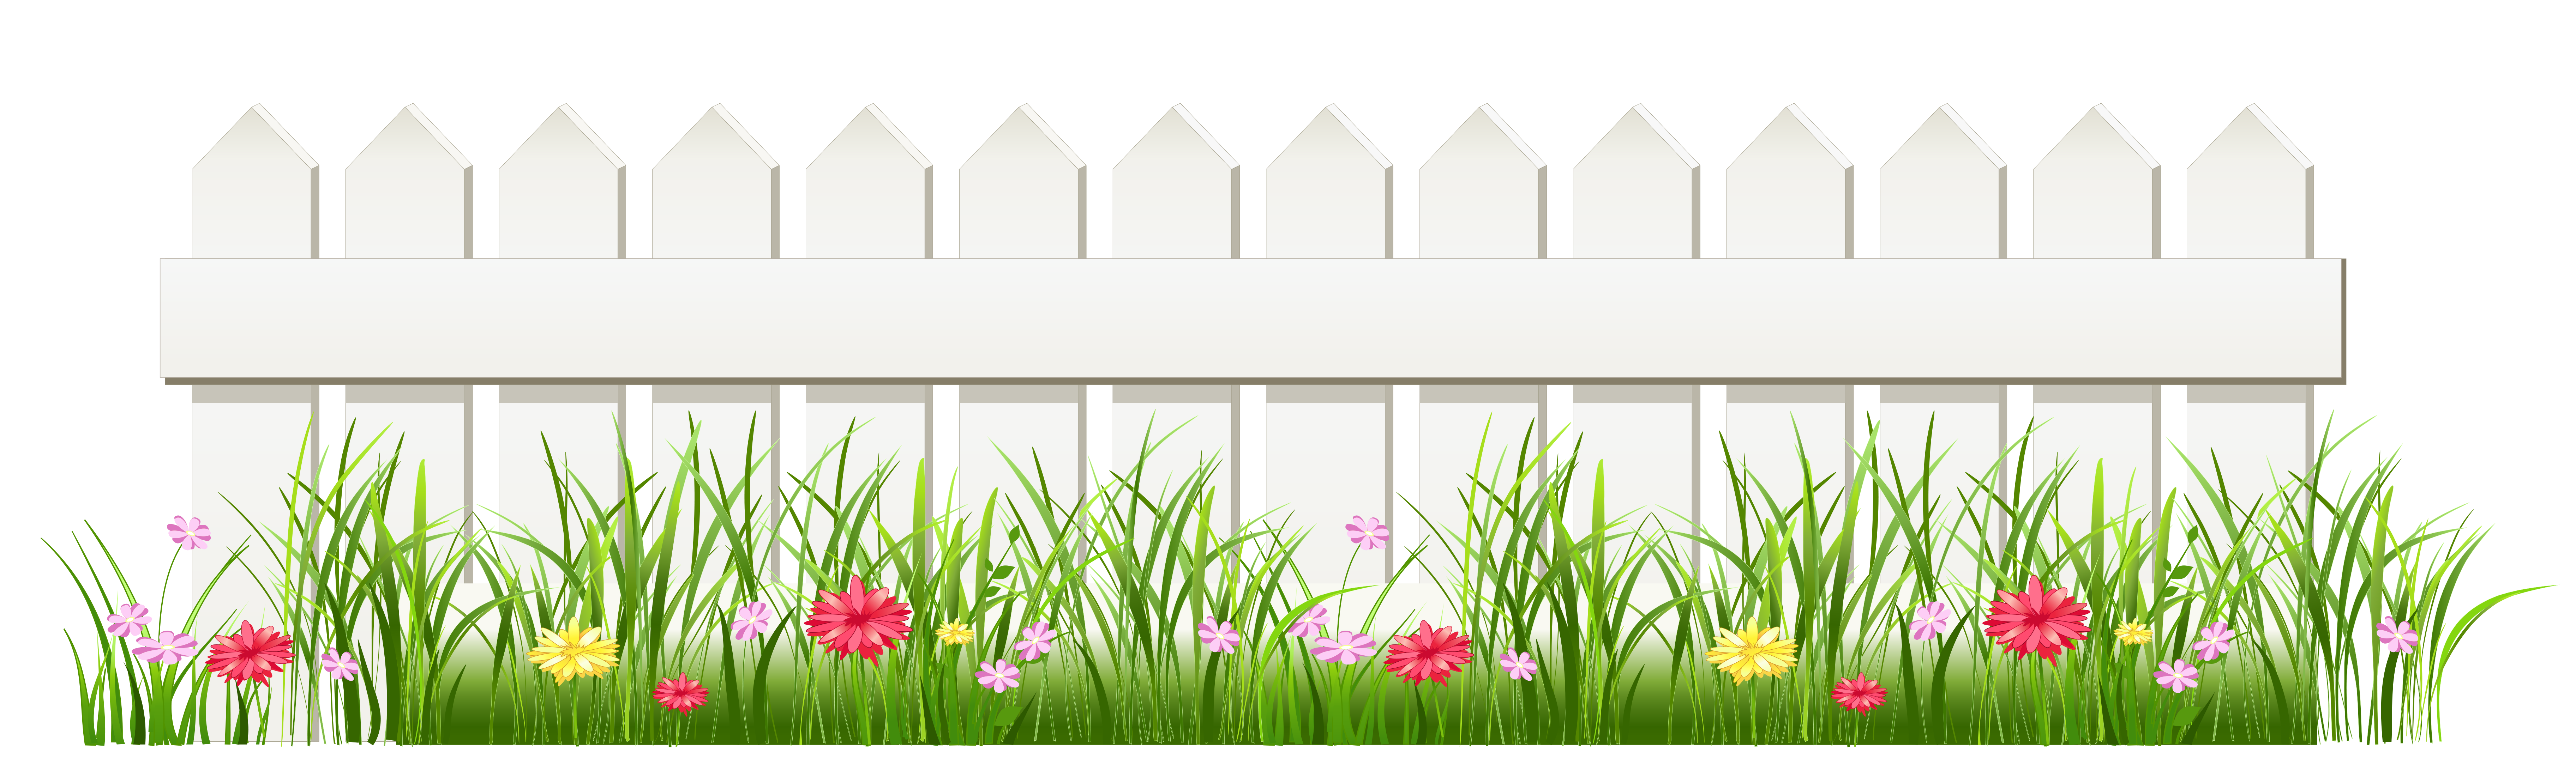 Crayon clipart fence. Transparent white with grass